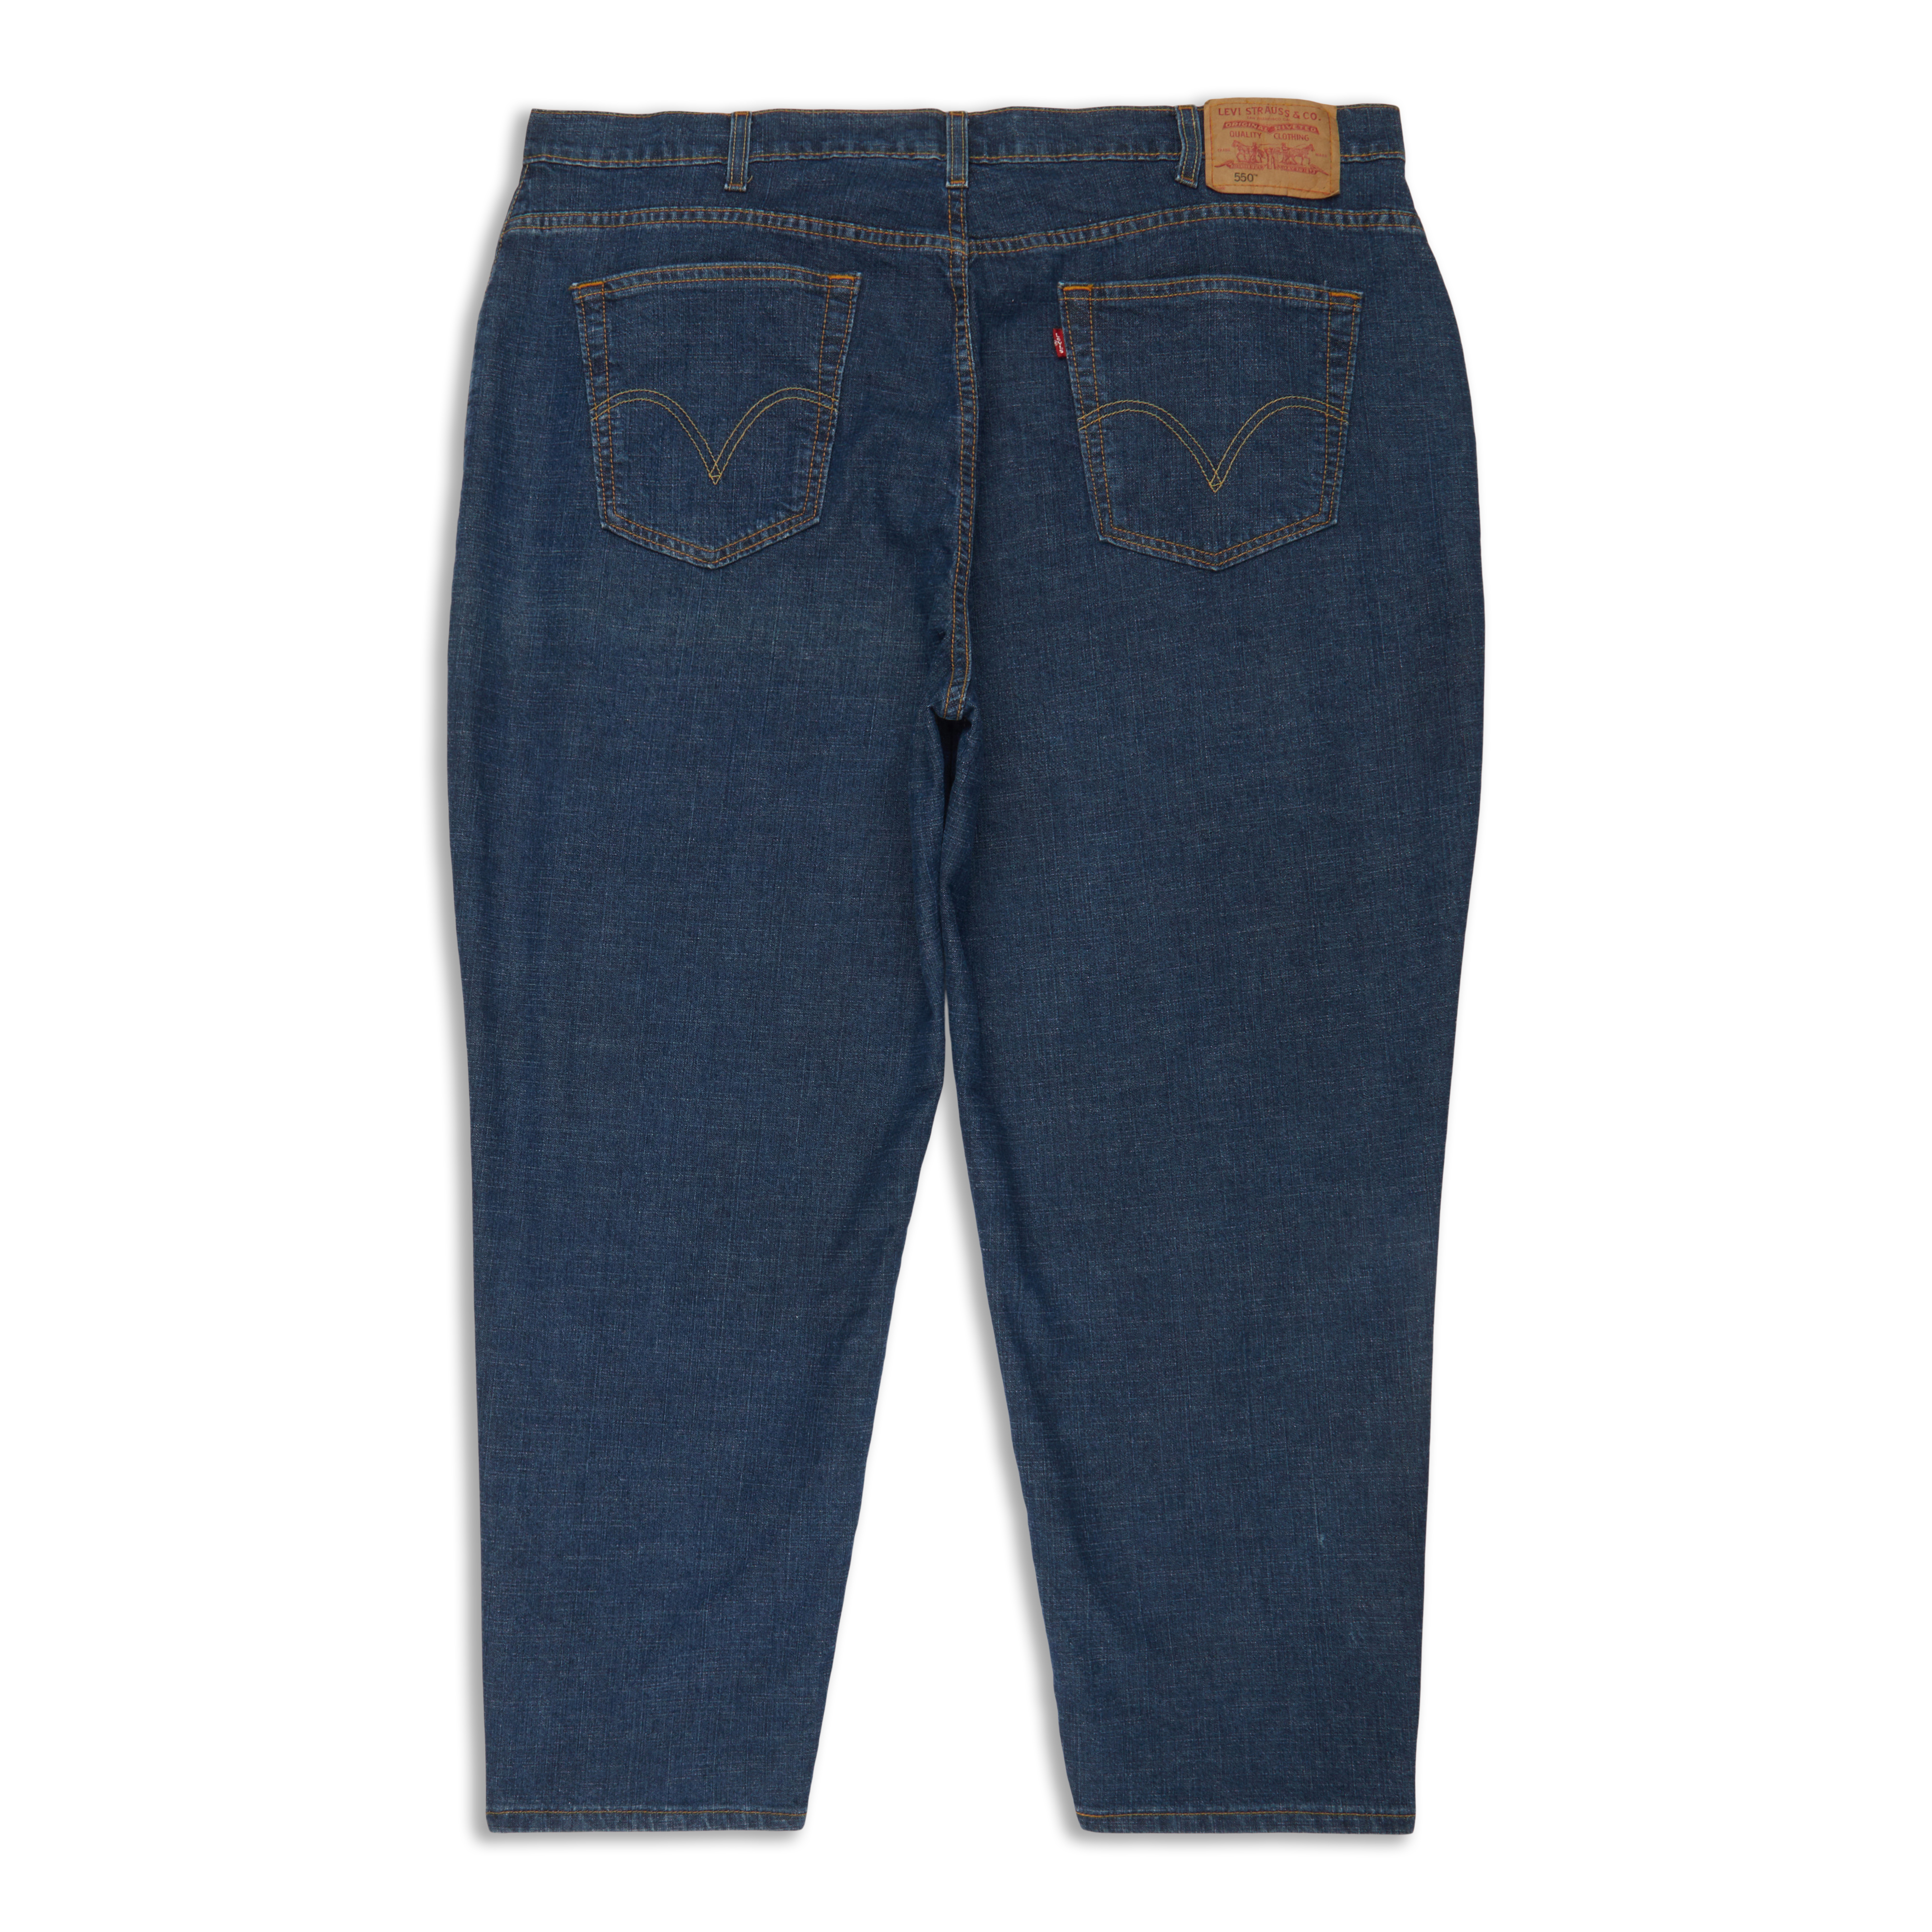 Levis 550™ Relaxed Fit Big Boys Jeans 8-20 (Husky) Original